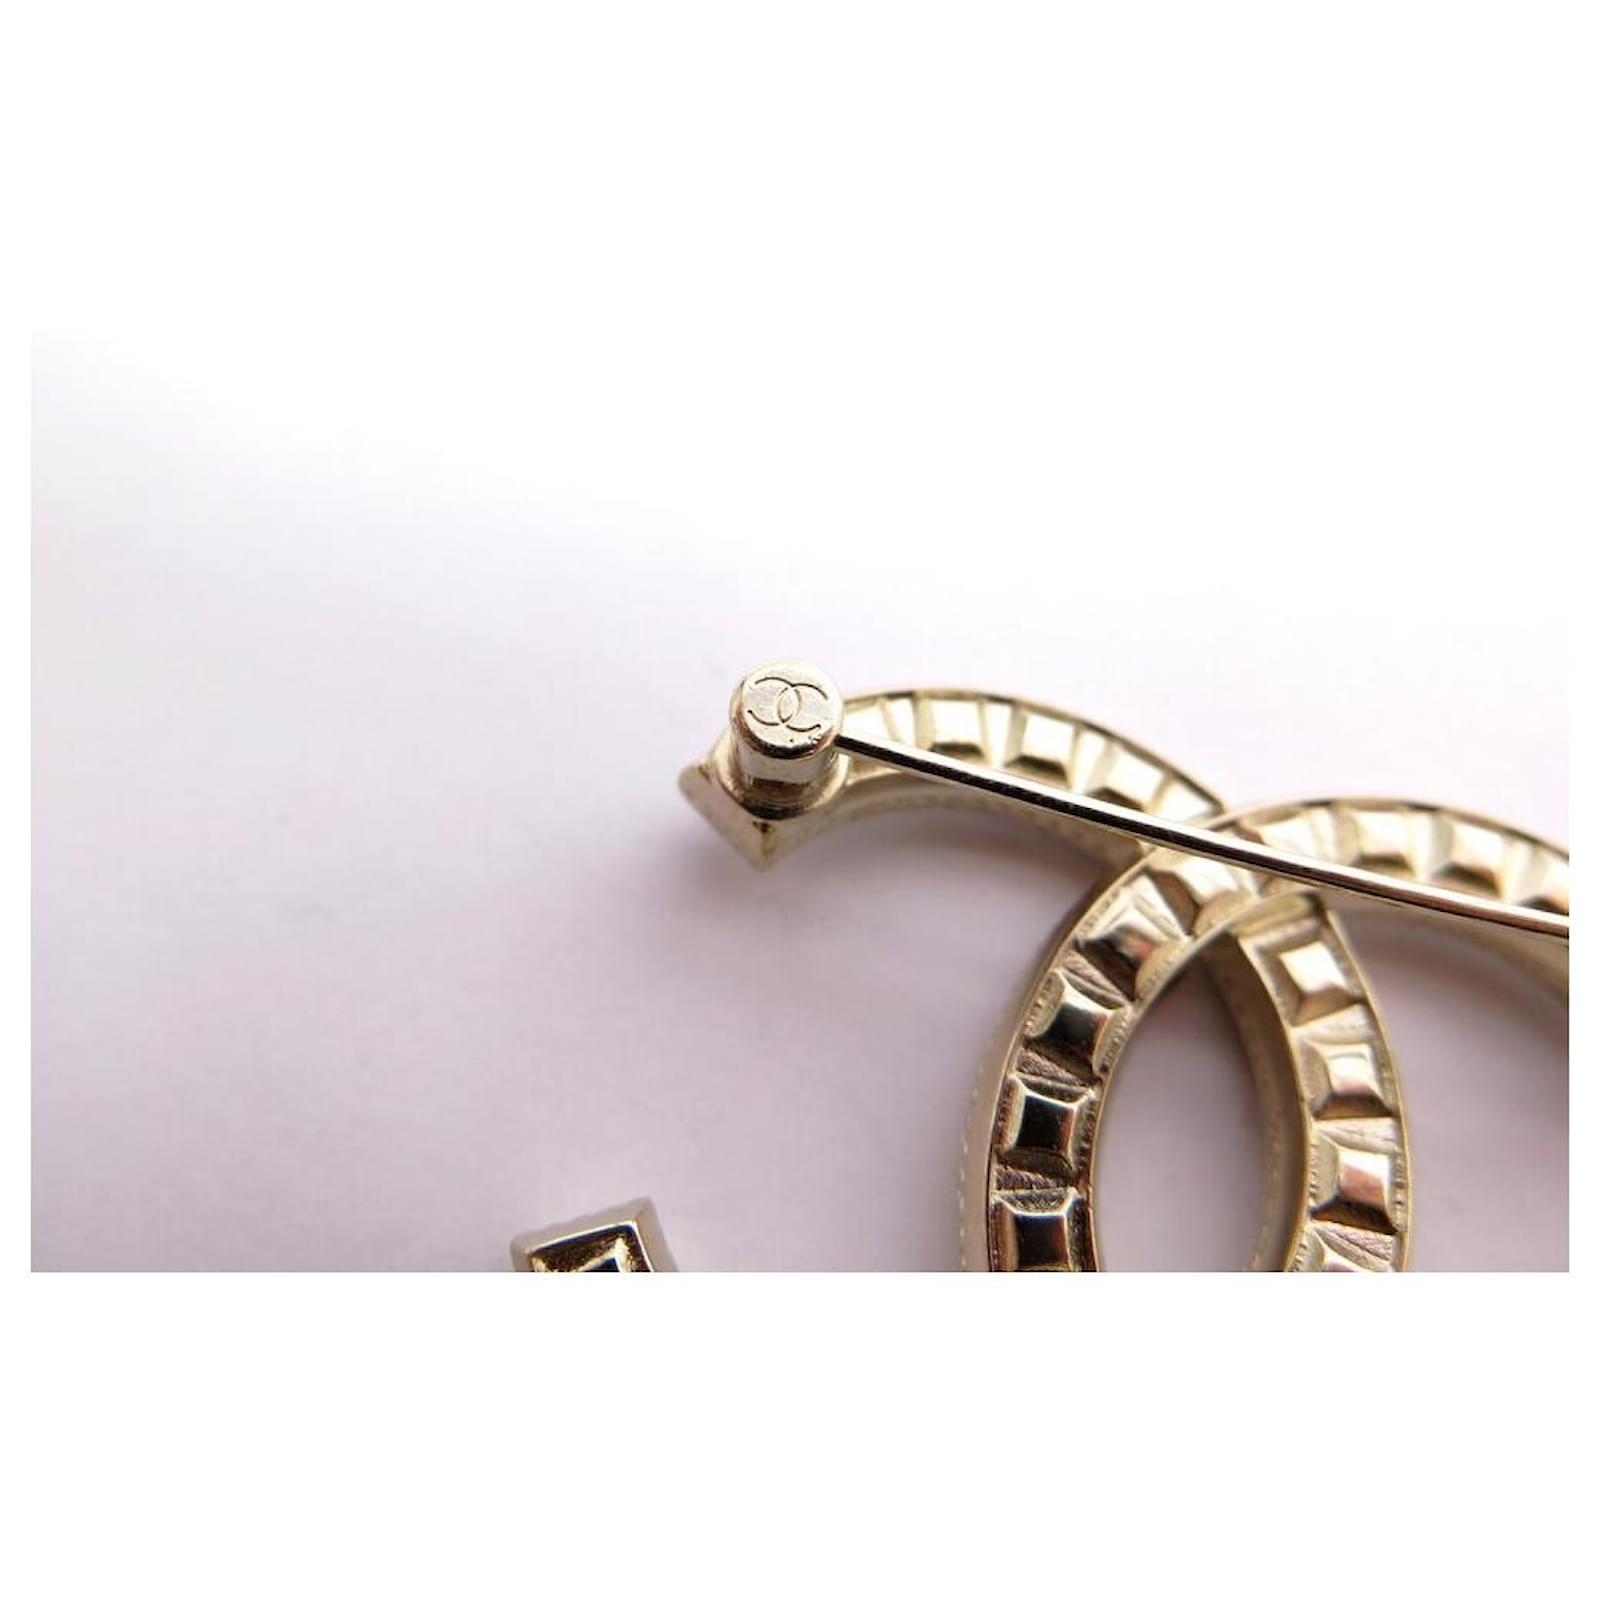 NEW CHANEL BROOCH CC LOGO & STRASS SQUARE IN GOLD METAL NEW GOLDEN BROOCH